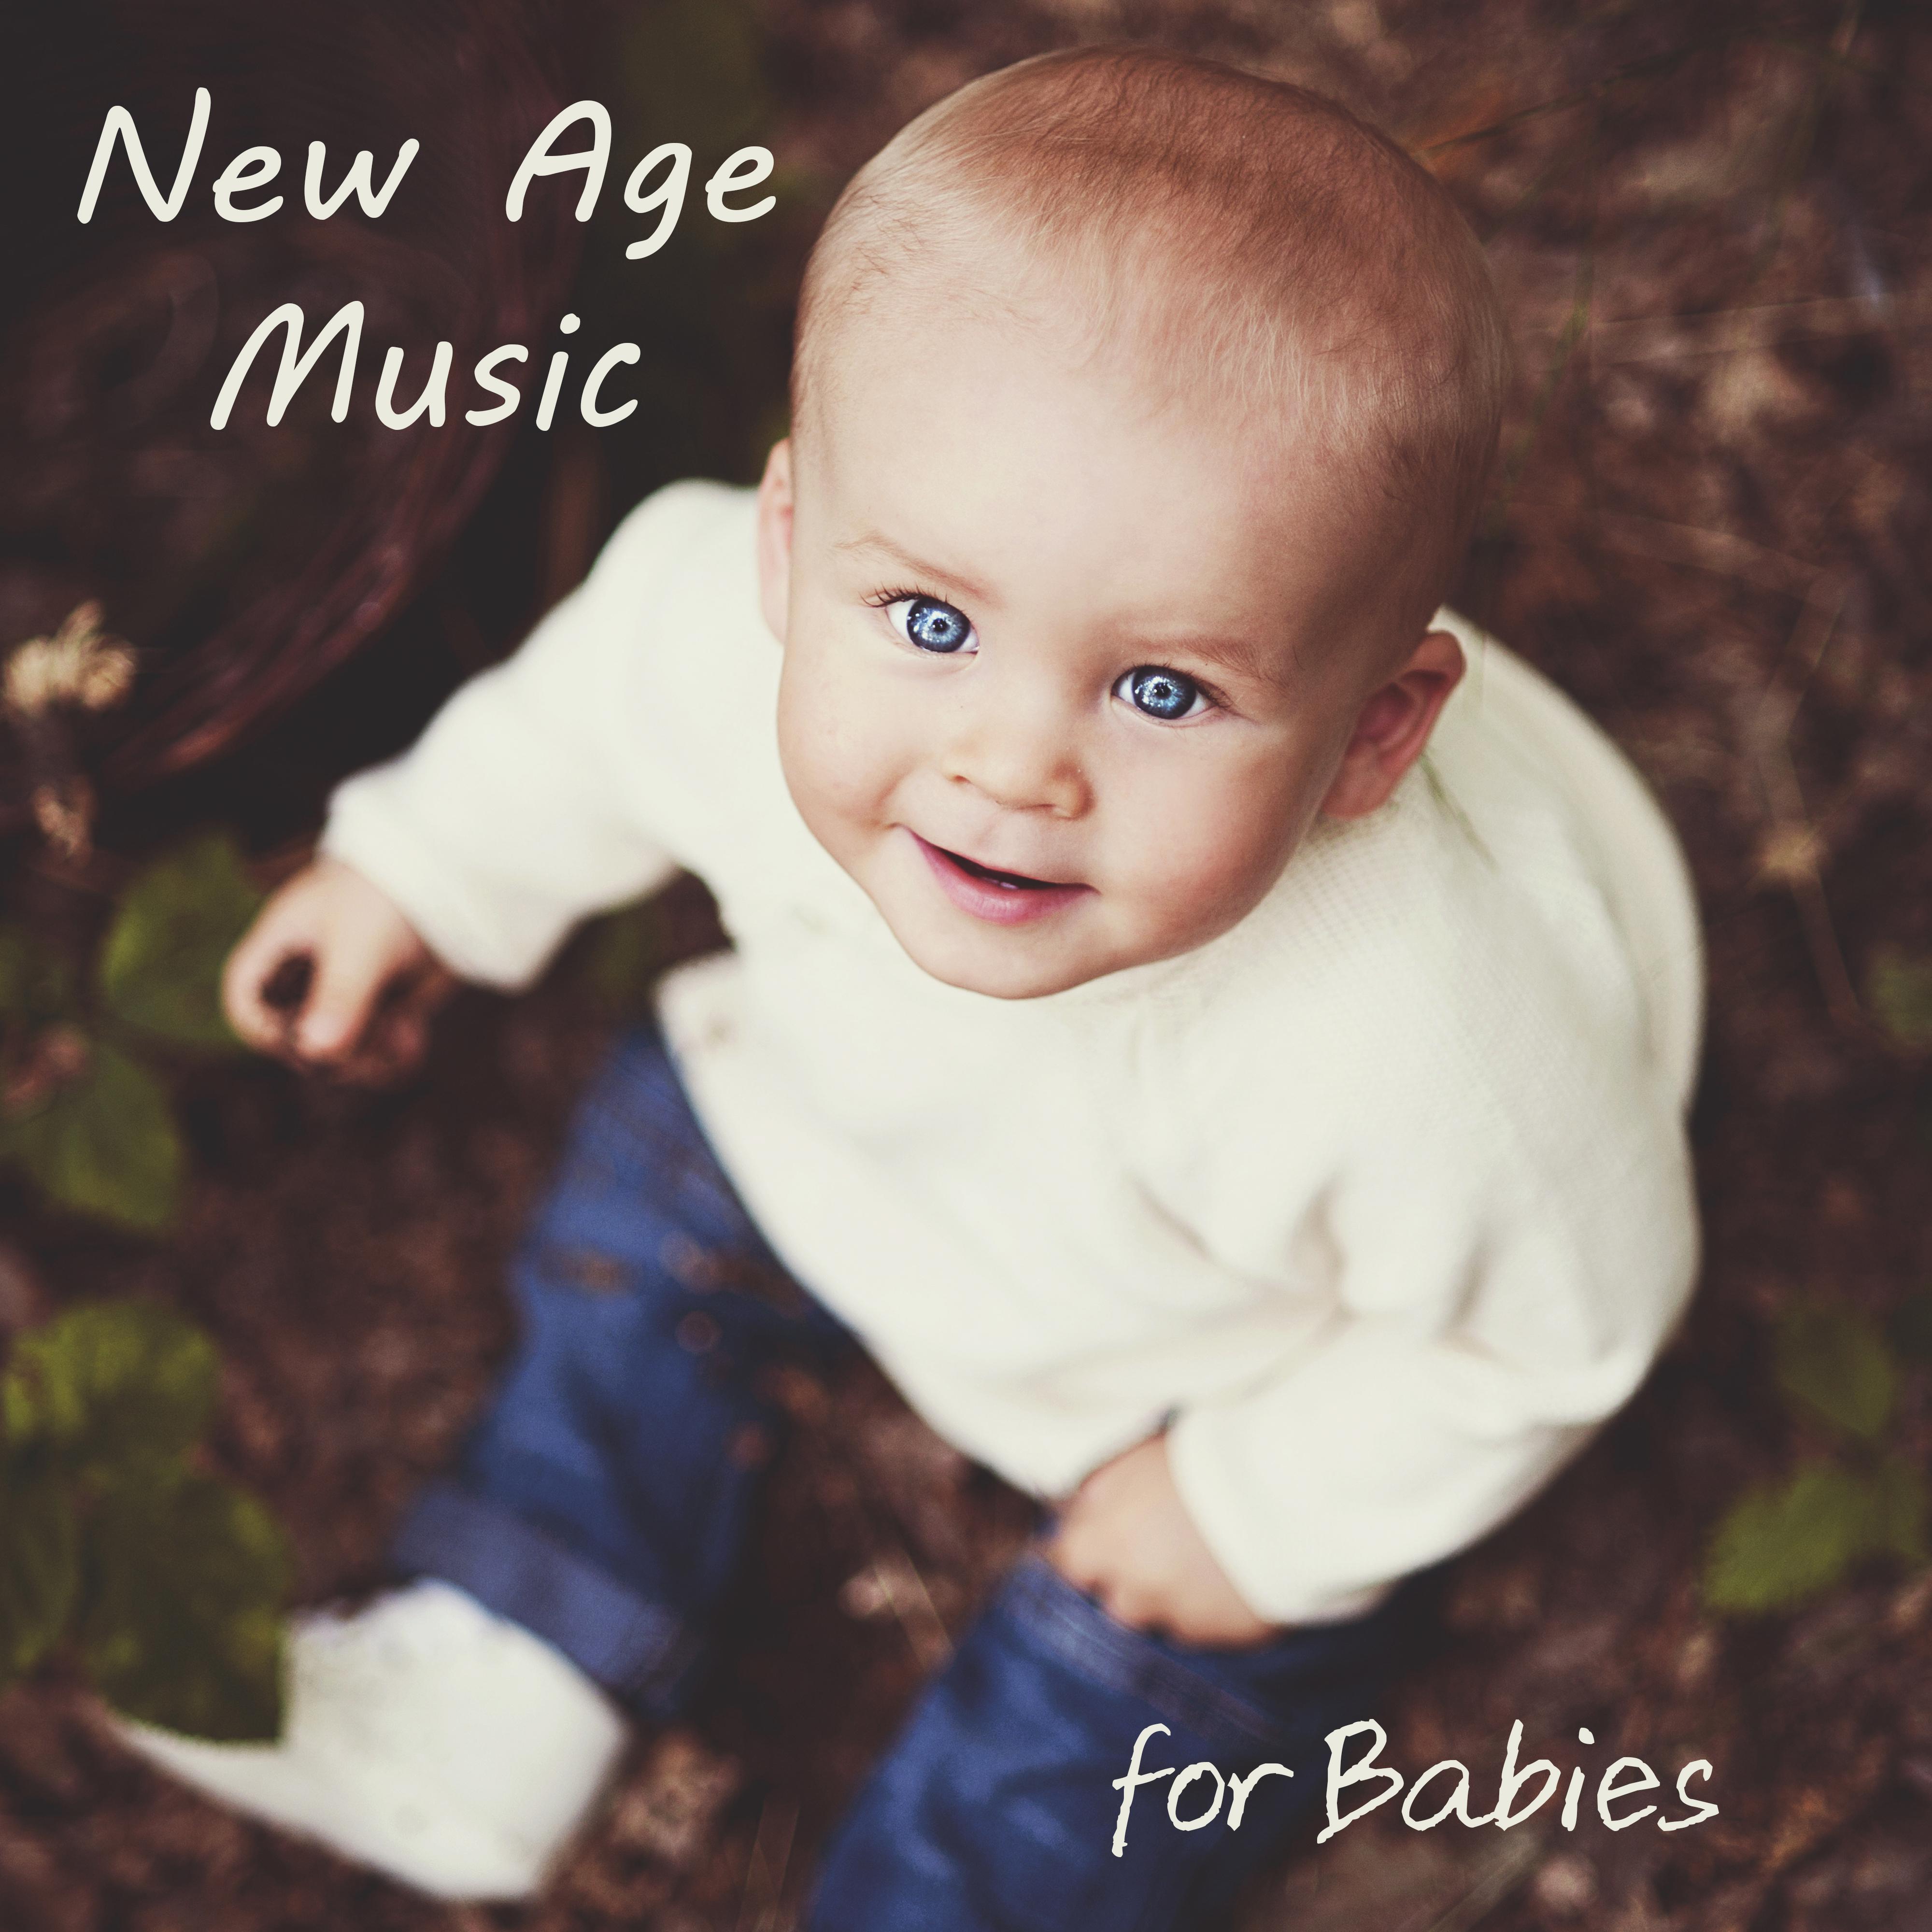 New Age Music for Babies  Relaxing Sounds of Nature, Lullabies for Babies, Deep Sleep Baby, Sweet Dreams